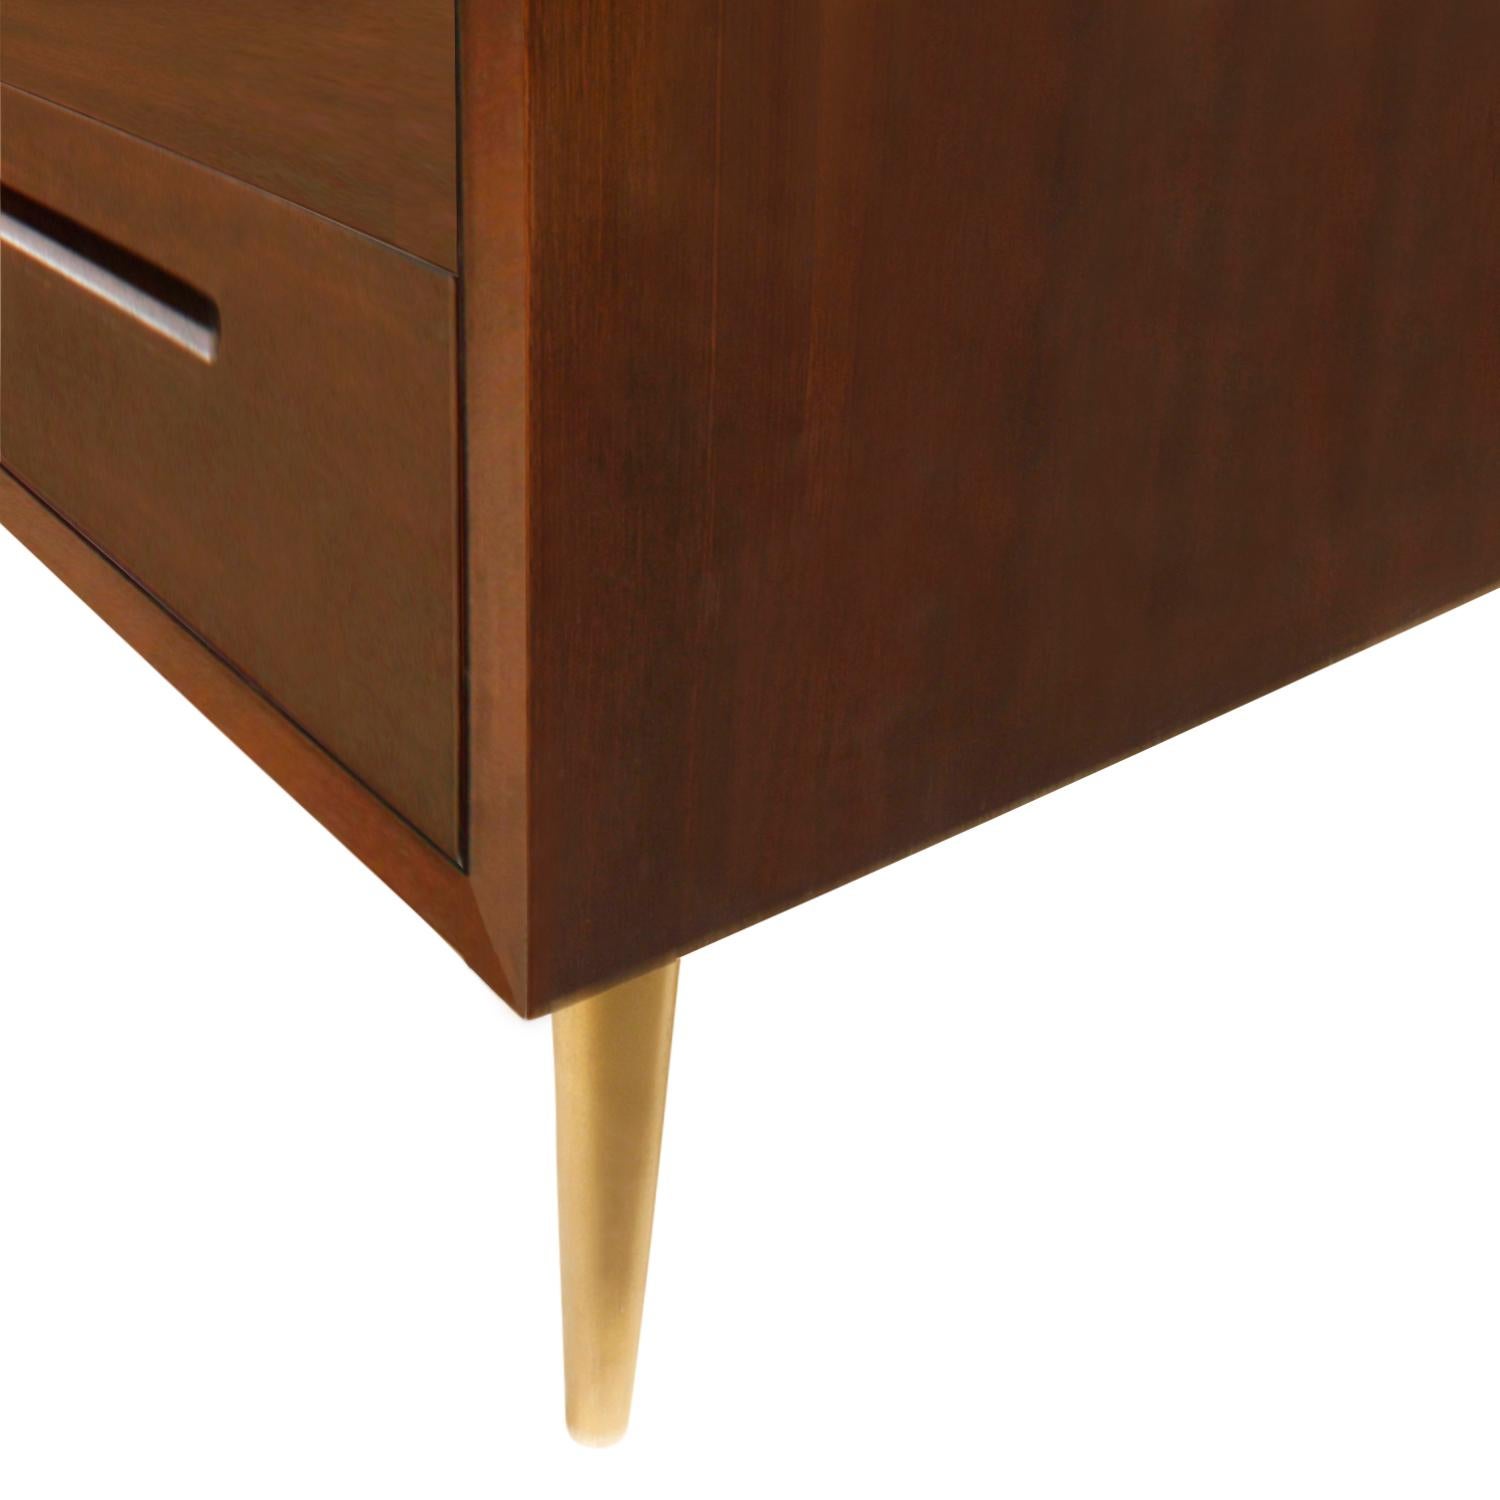 Hand-Crafted Edward Wormley Side Table in Mahogany with Conical Brass Legs 1940s 'Signed' For Sale